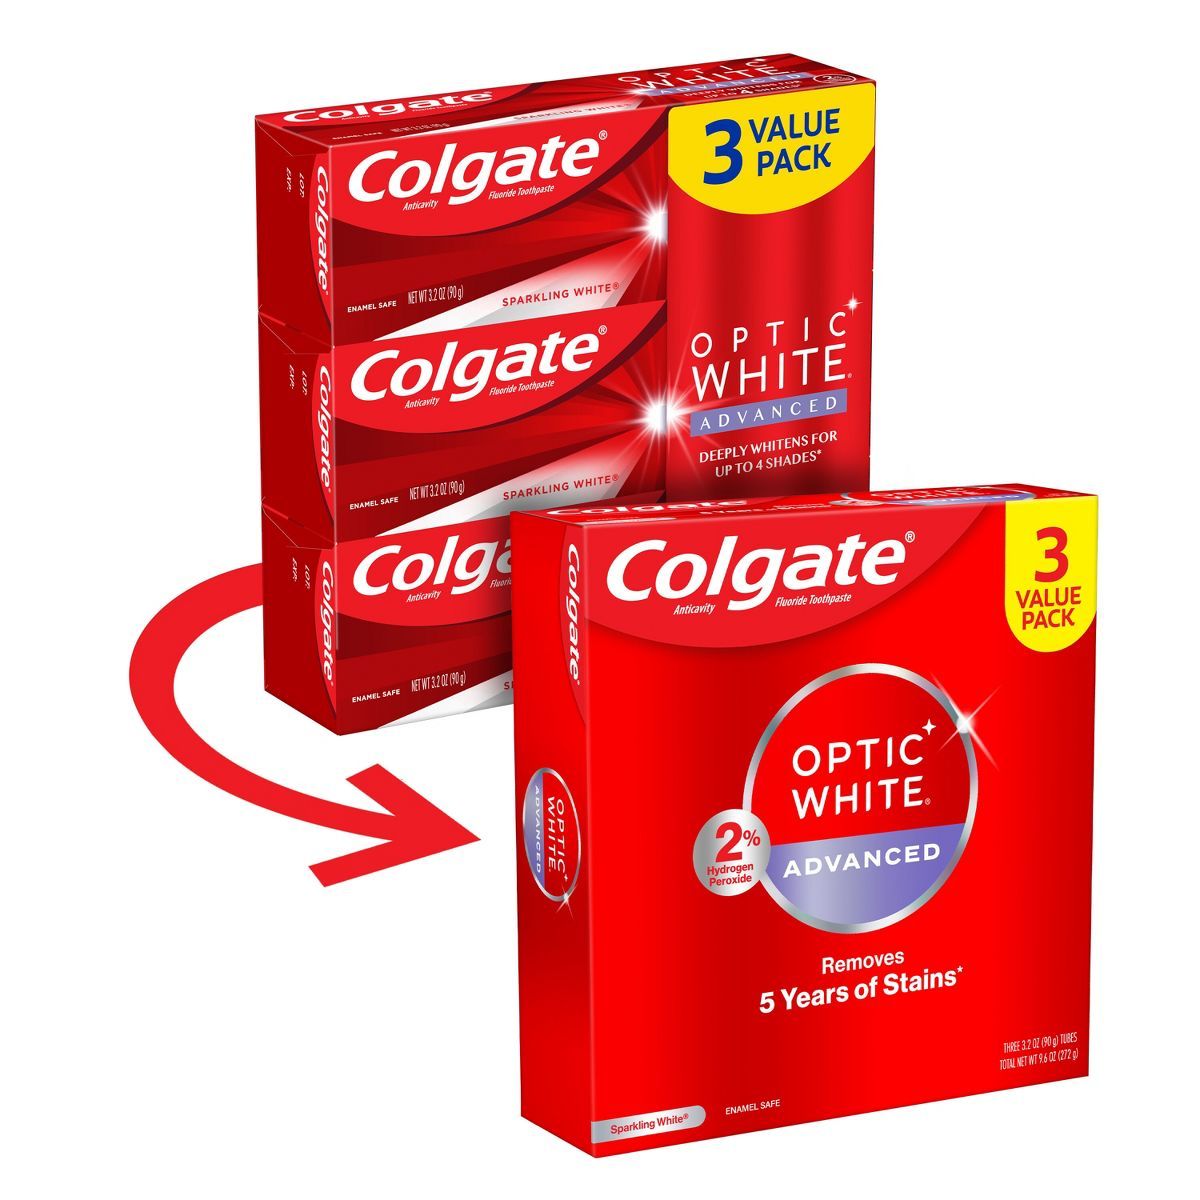 Colgate Optic White Advanced Whitening Toothpaste with Fluoride, 2% Hydrogen Peroxide - Sparkling... | Target